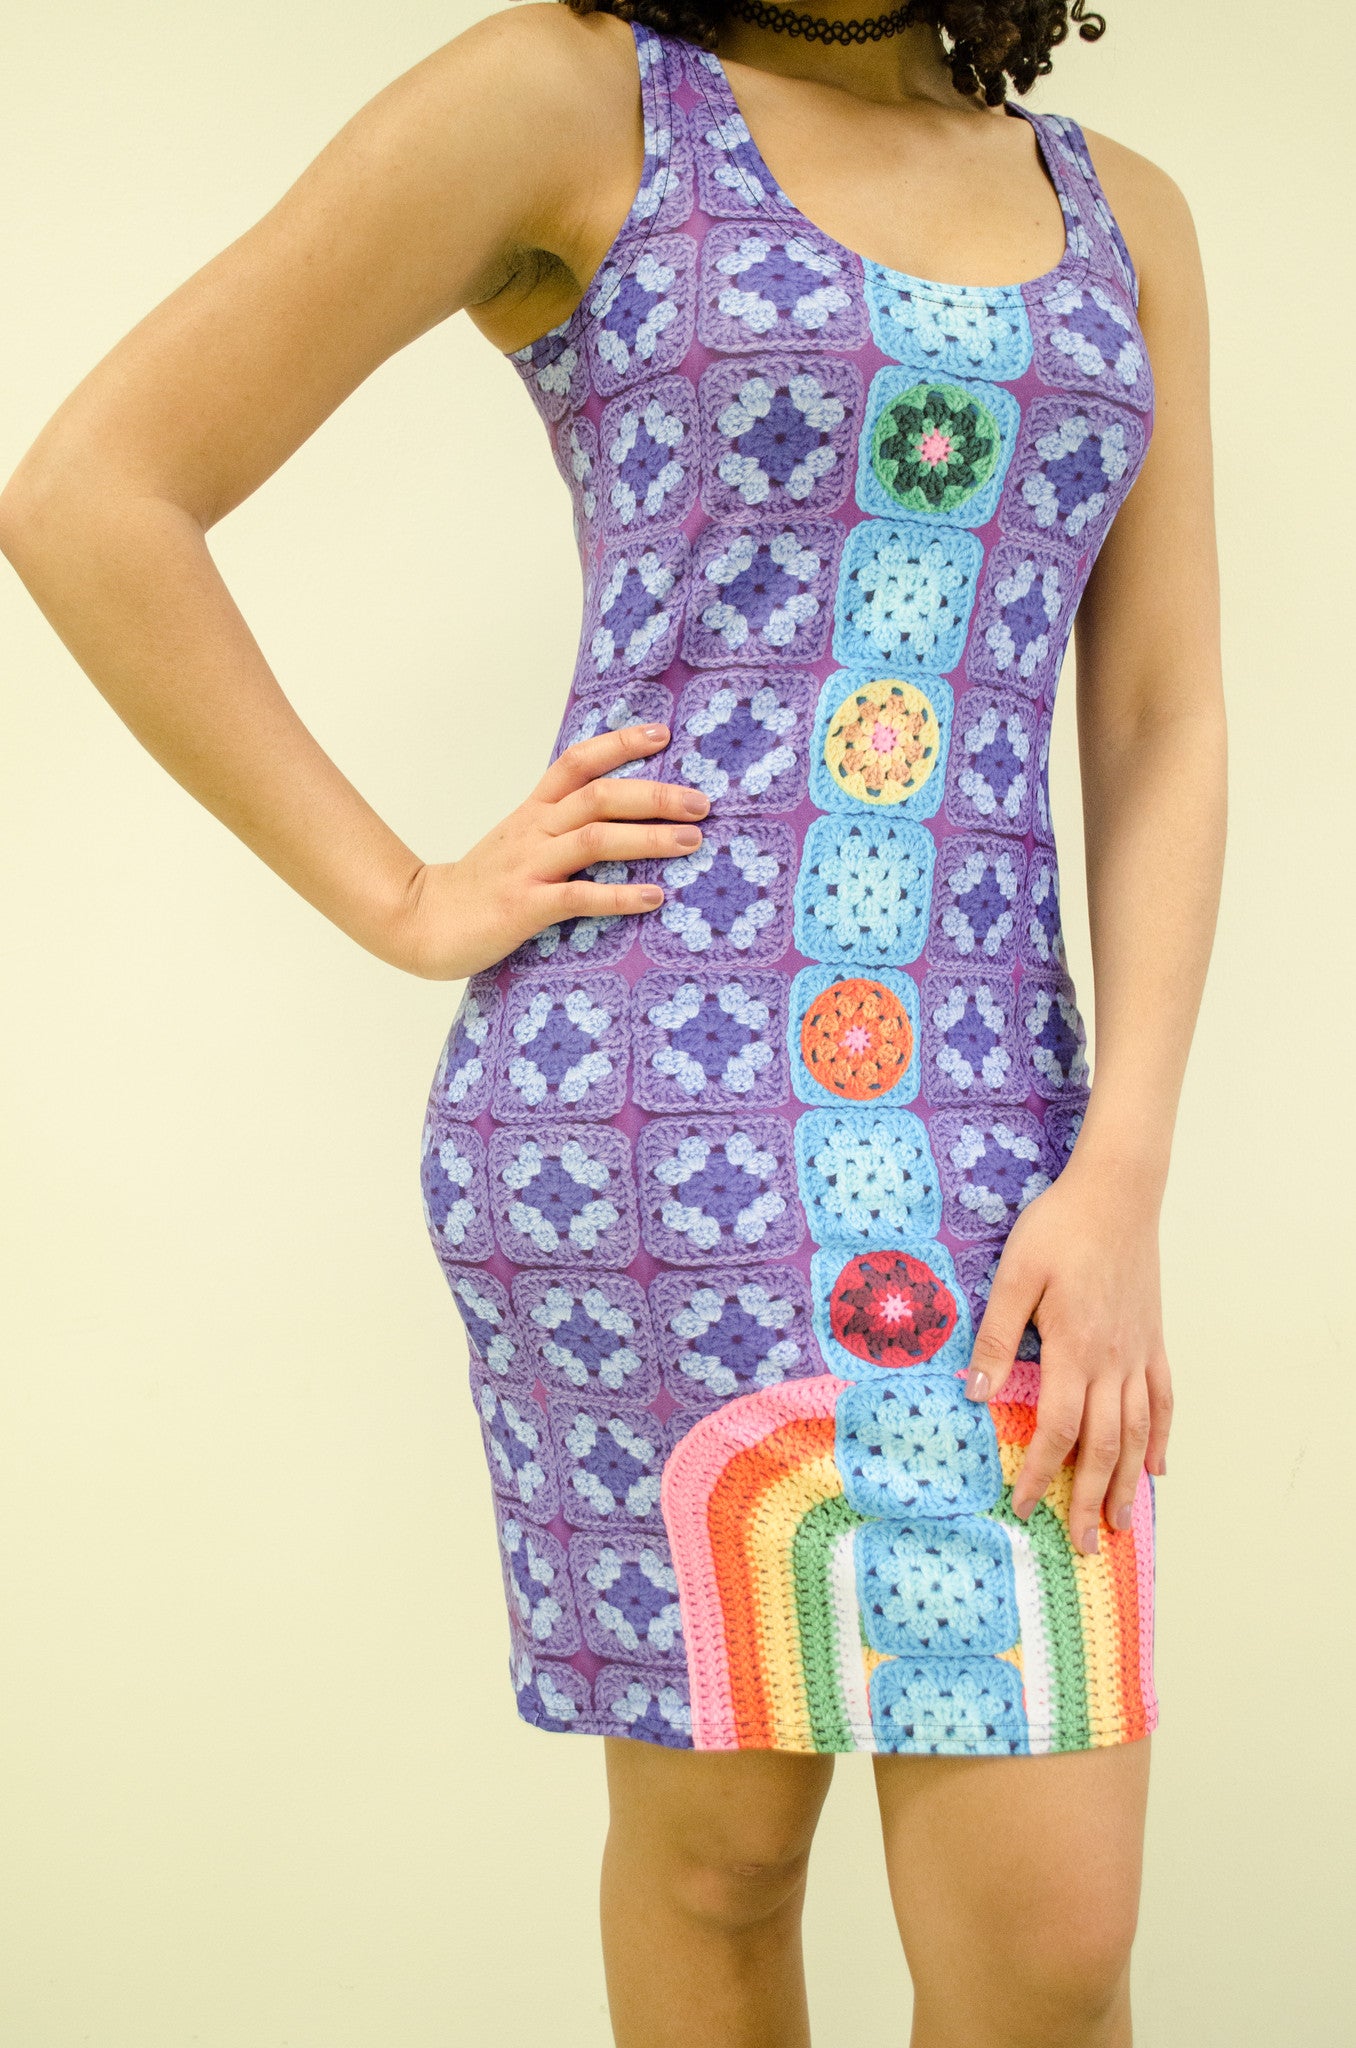 Snapdragon Brand Clothing Granny Square Crochet Print purple dress in style Chakral includes rainbows and four chakra points. Made of comfortable spandex. 